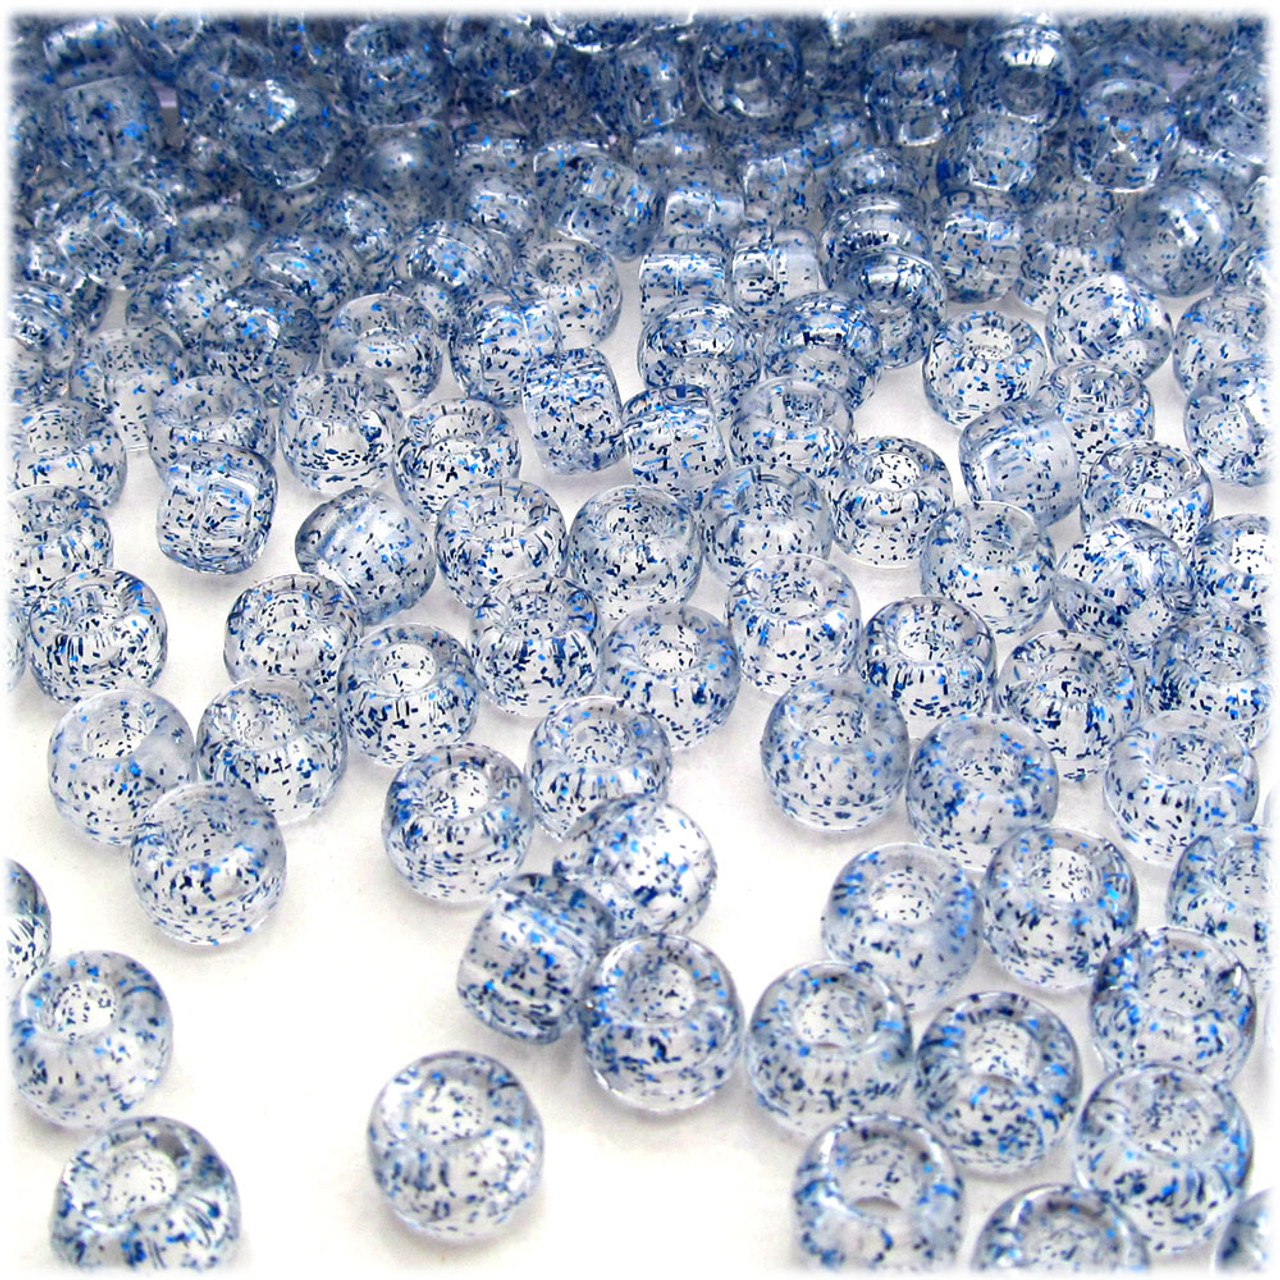 Pony Beads, Transparent, 9x6mm, 1,000-pc, Clear